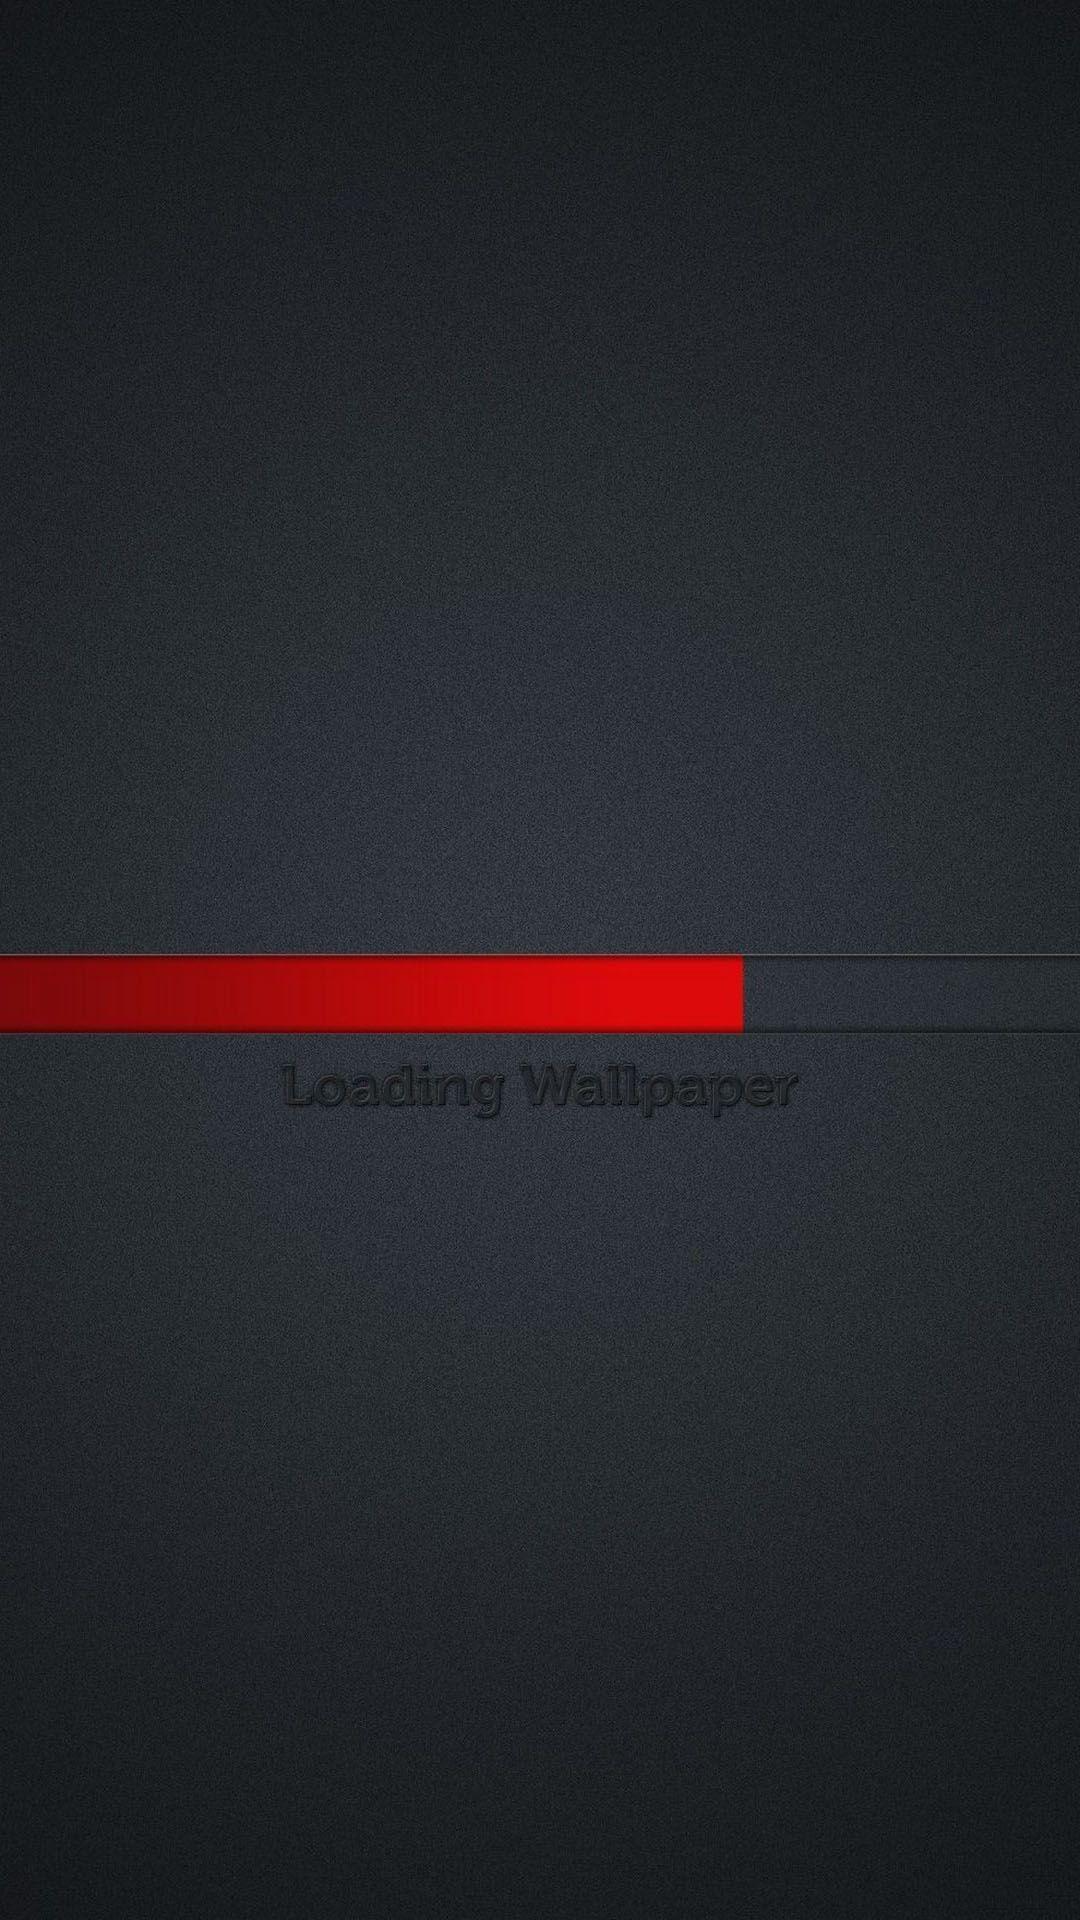 Loading Wallpaper Red Line Grey Background Android Wallpaper free download